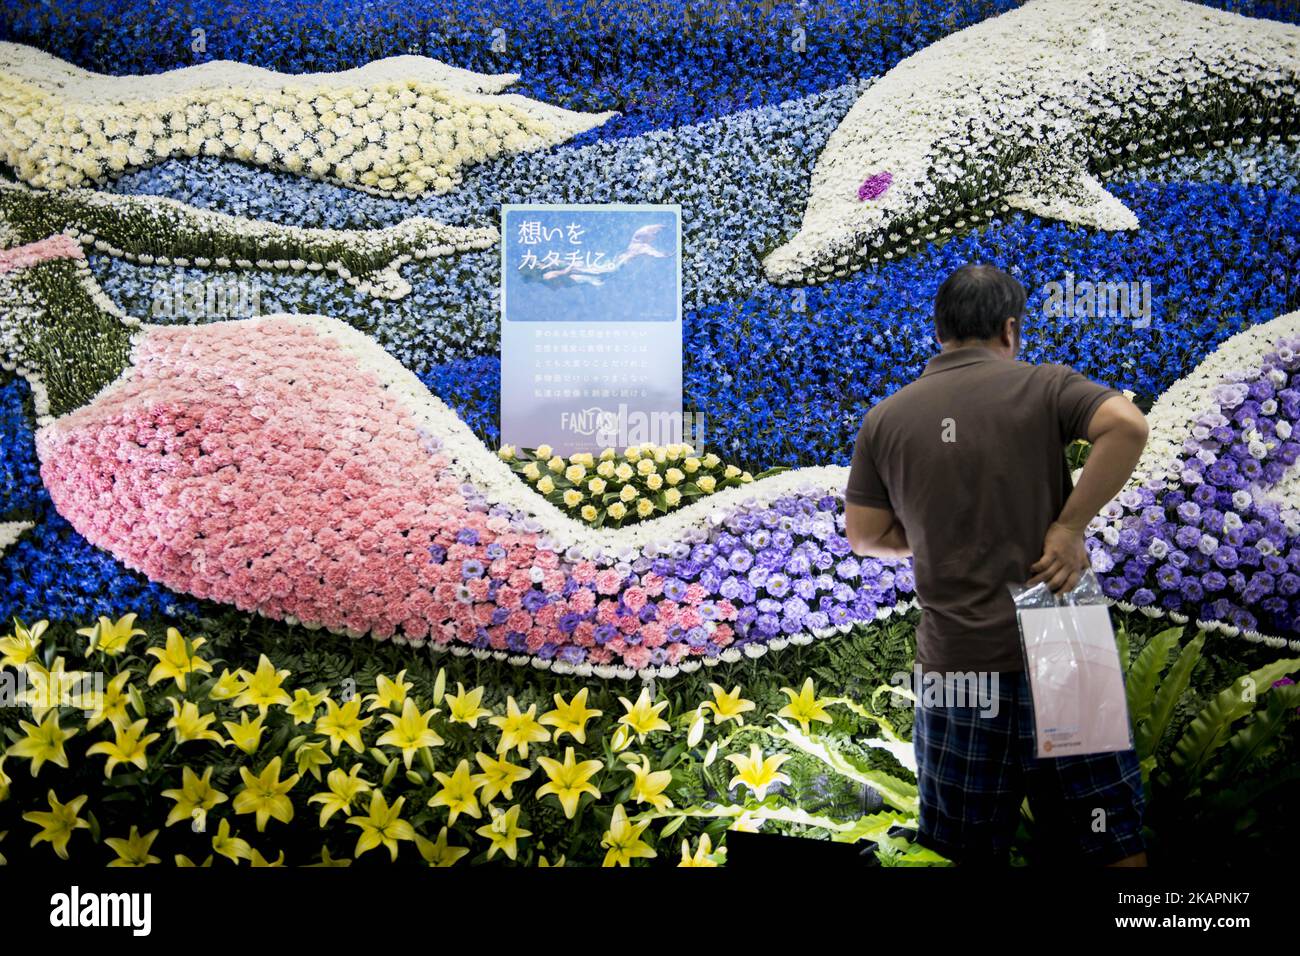 Visitor to the Tokyo Int'l Funeral & Cemetery Show look at a wall of flowers, in Tokyo, Japan on August 23, 2017. Hundreds of funeral home operators, cemeteries operators, crematorium operators, traders, suppliers, buyers, professional associations and investors gather at this professional funeral event. (Photo by Alessandro Di Ciommo/NurPhoto) Stock Photo